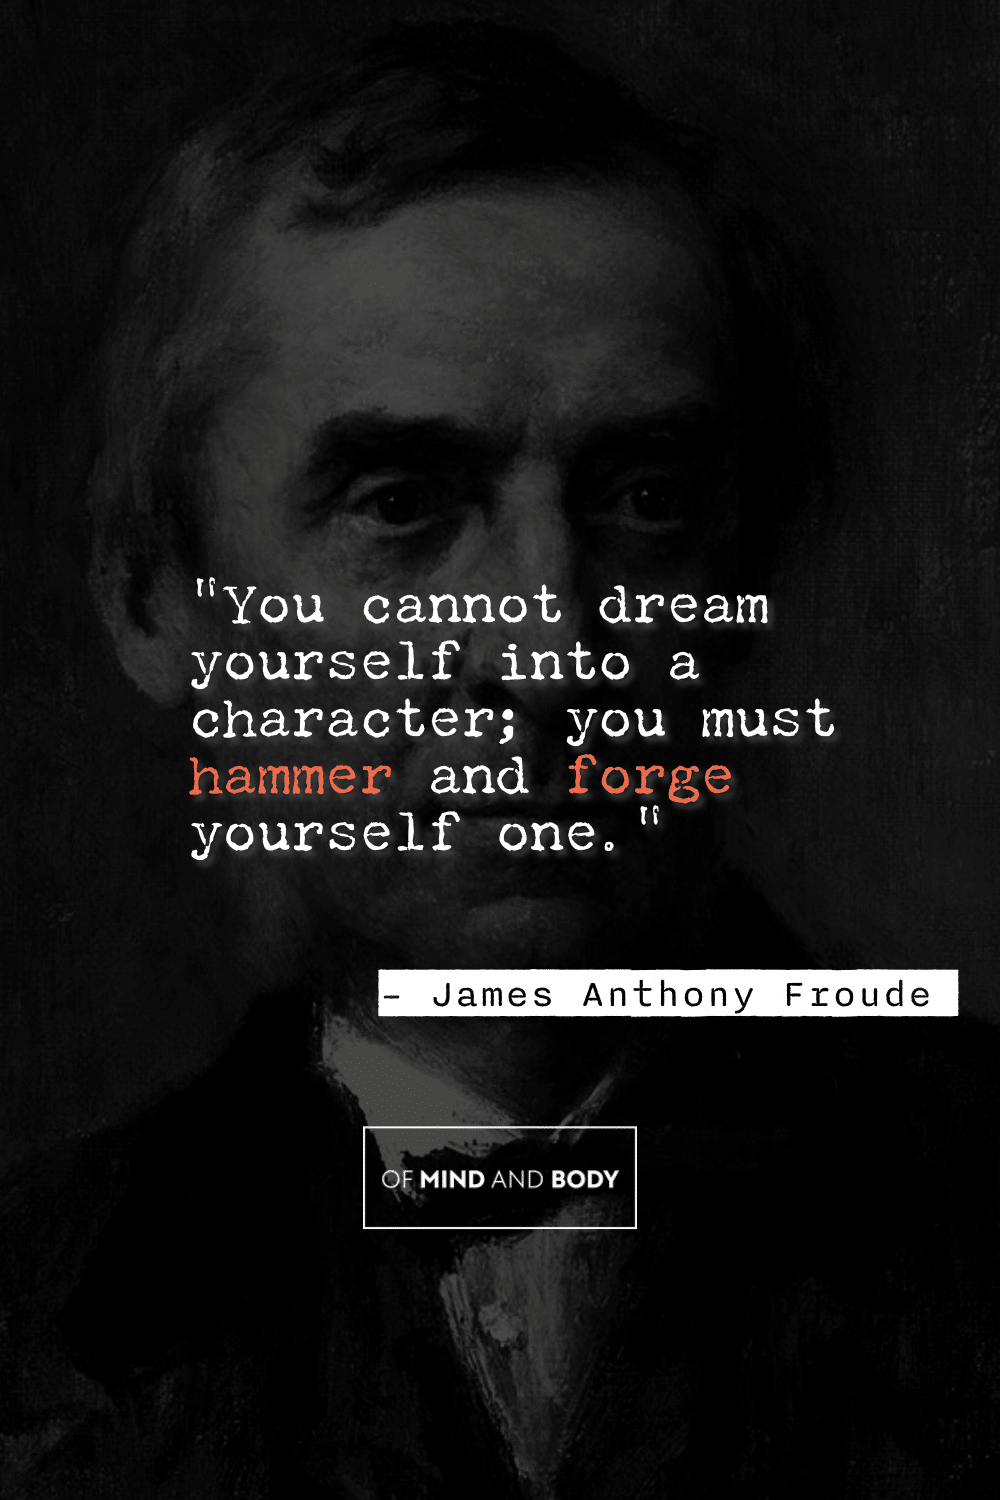 Quotes on Self Improvement - "You cannot dream yourself into a character; you must hammer and forge yourself one."